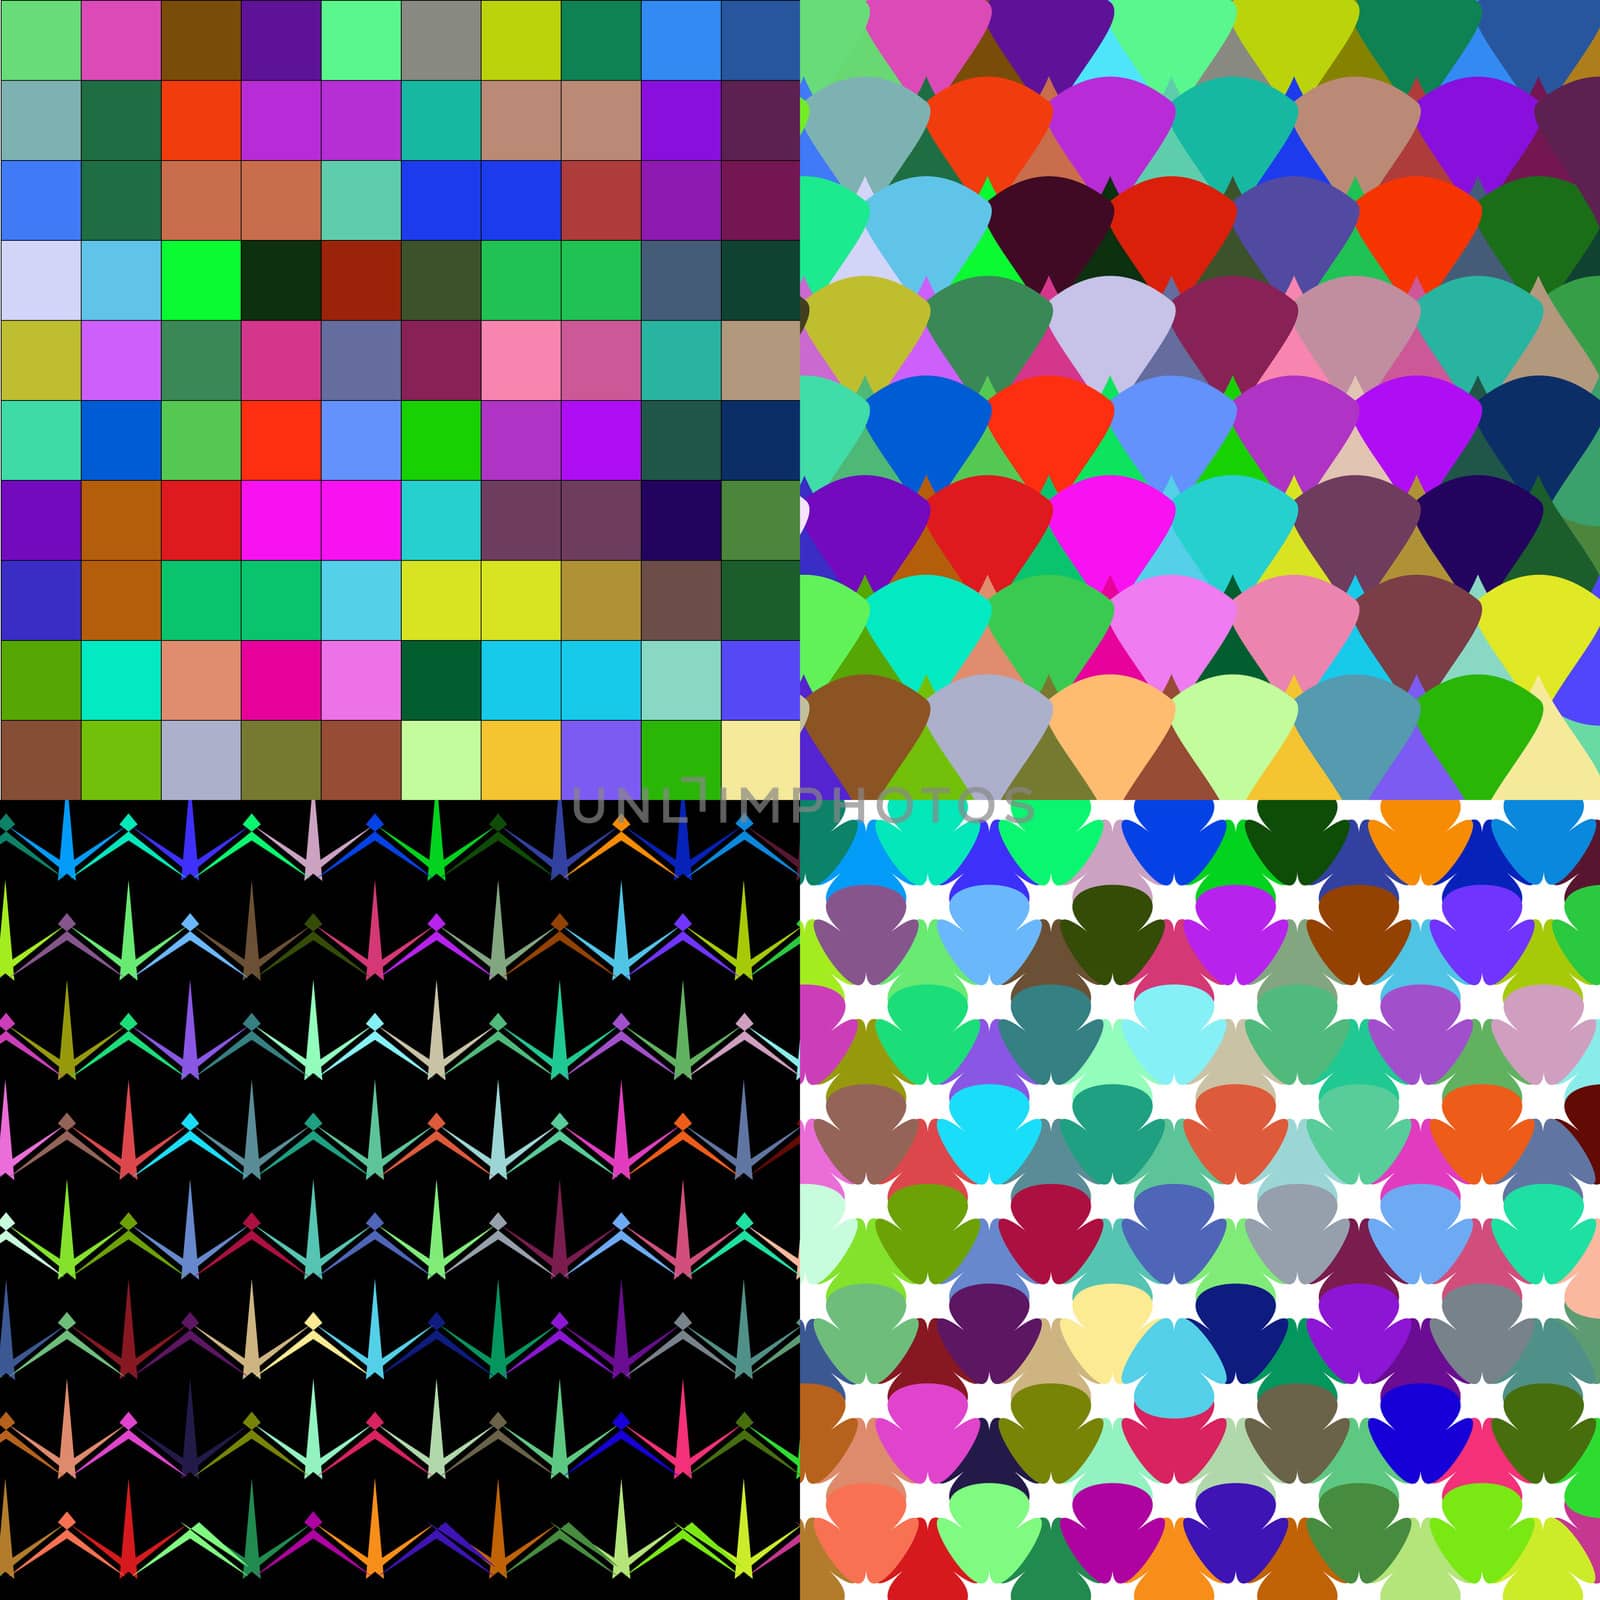 Set of Abstract rainbow colorful tiles mosaic painting geometric palette pattern background.  illustration